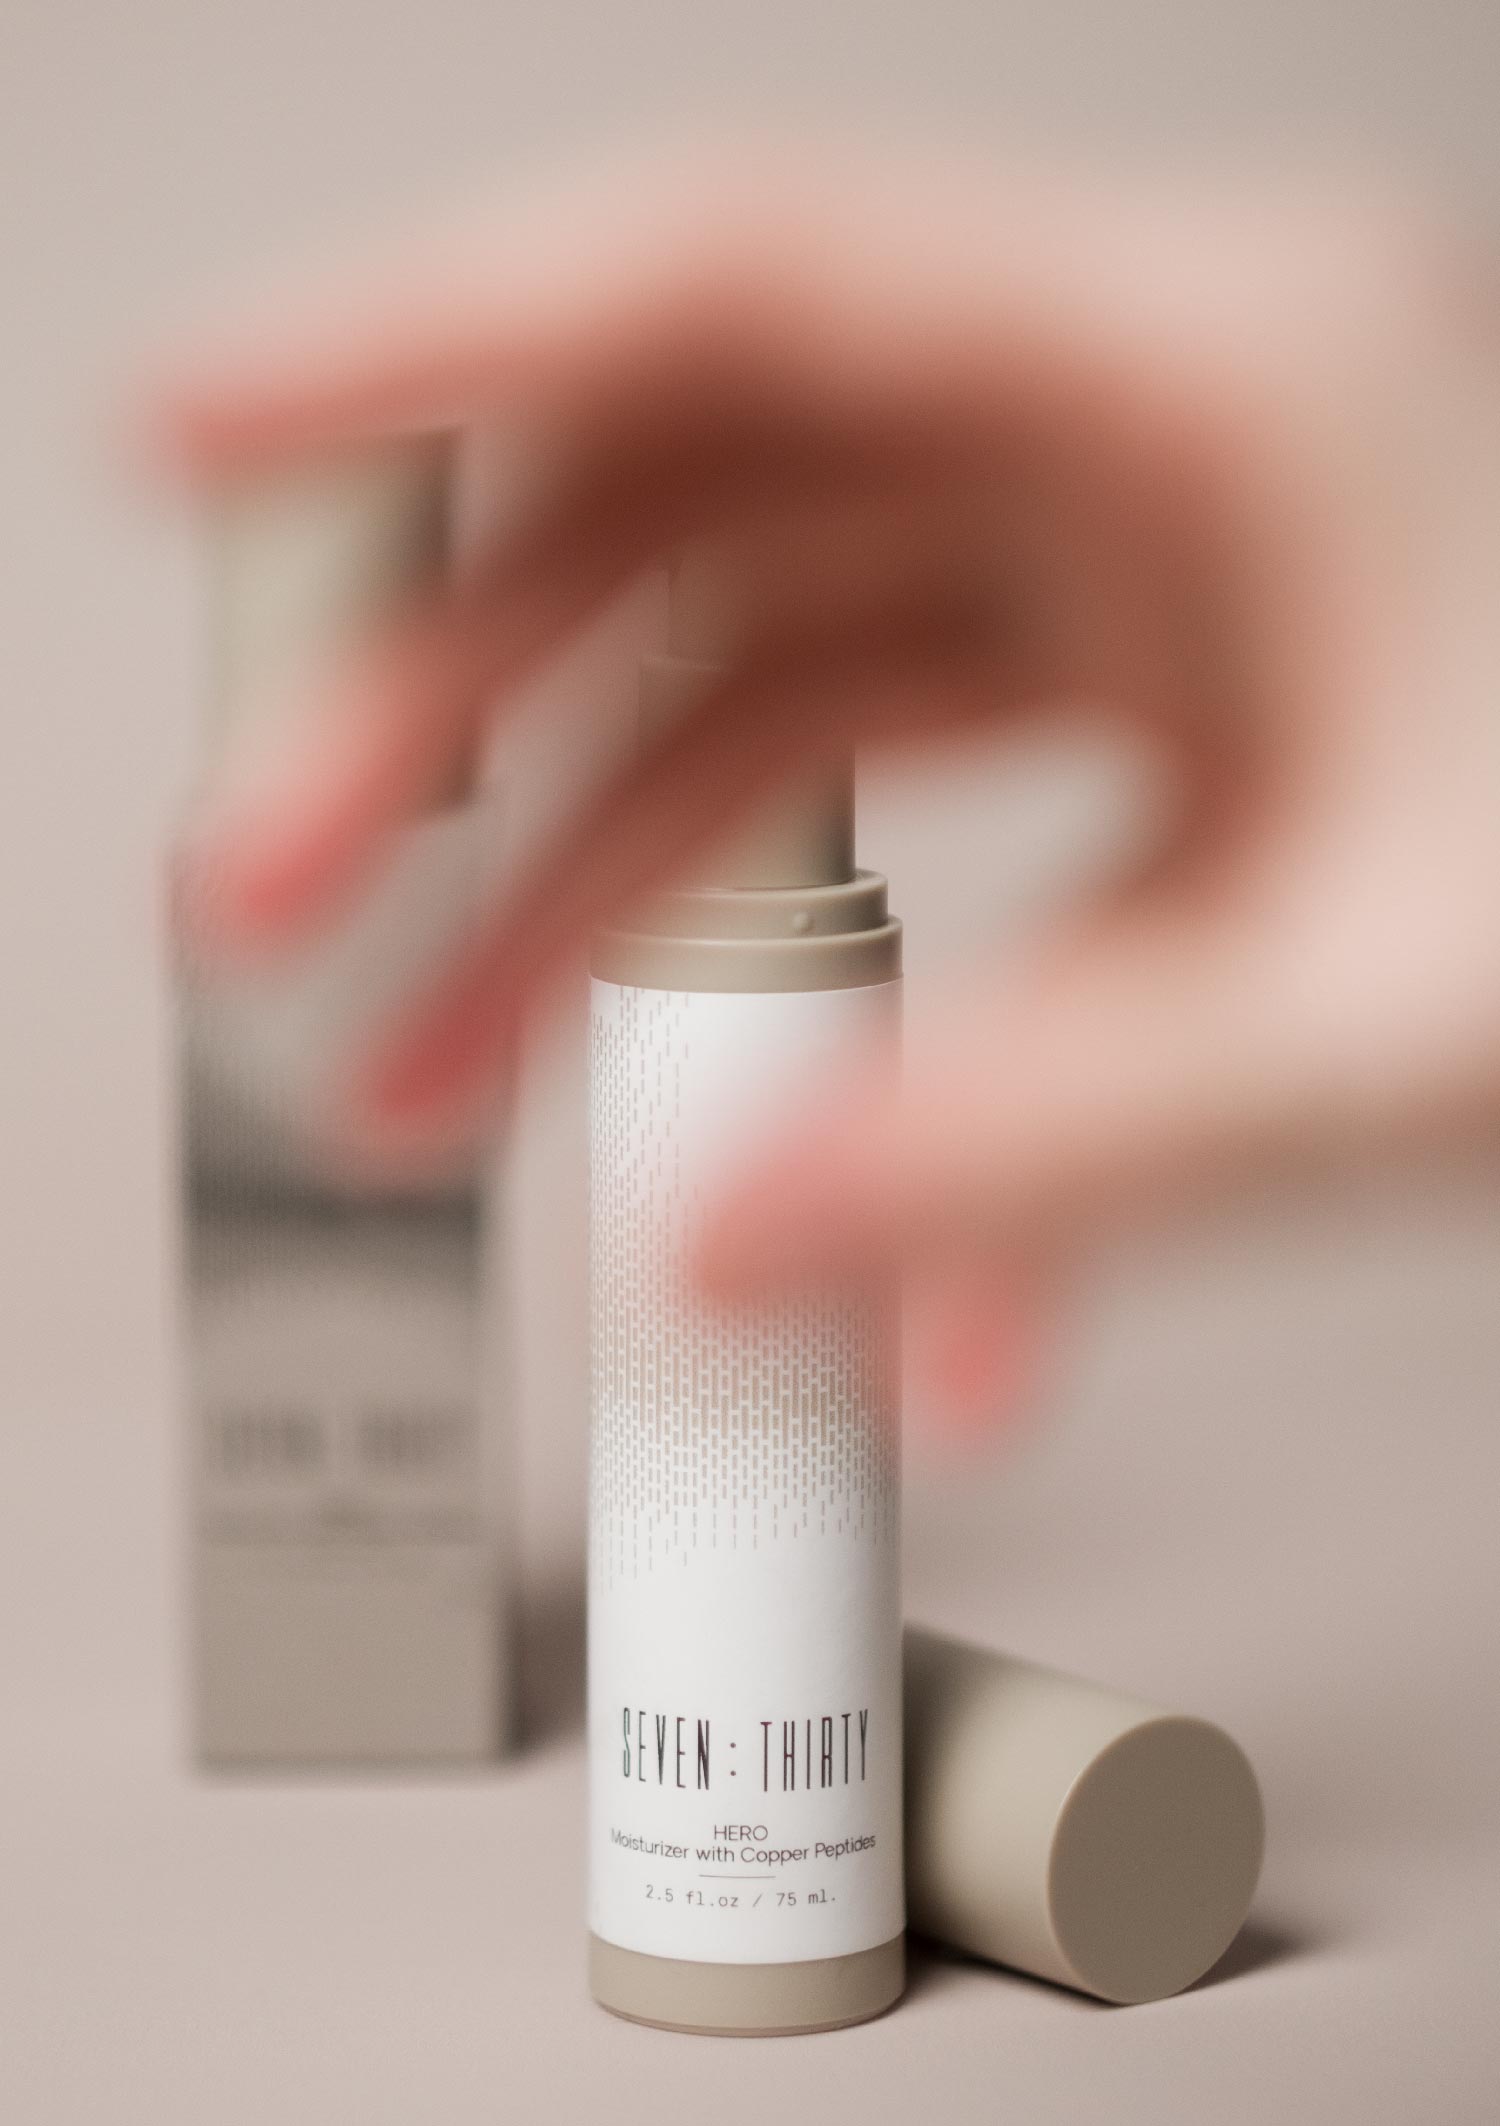 HERO Moisturizer with Copper Peptides on a khaki background with an out-of-focus hand in the foreground